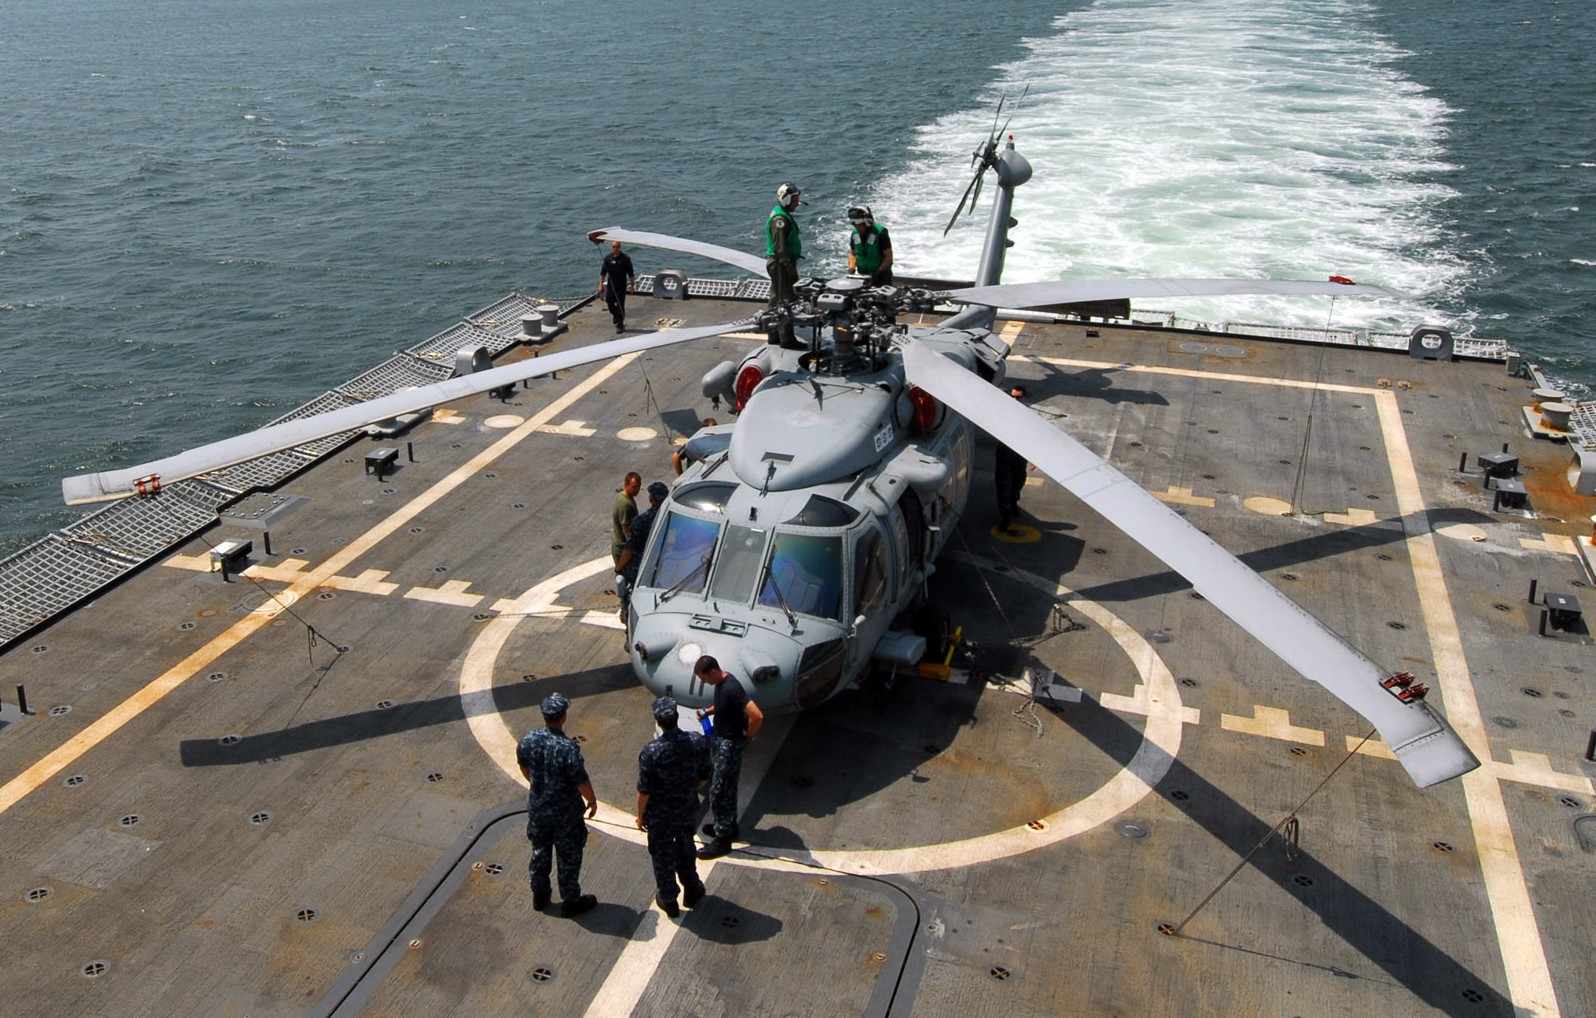 hsc-22 sea knights mh-60s seahawk uss freedom lcs-1